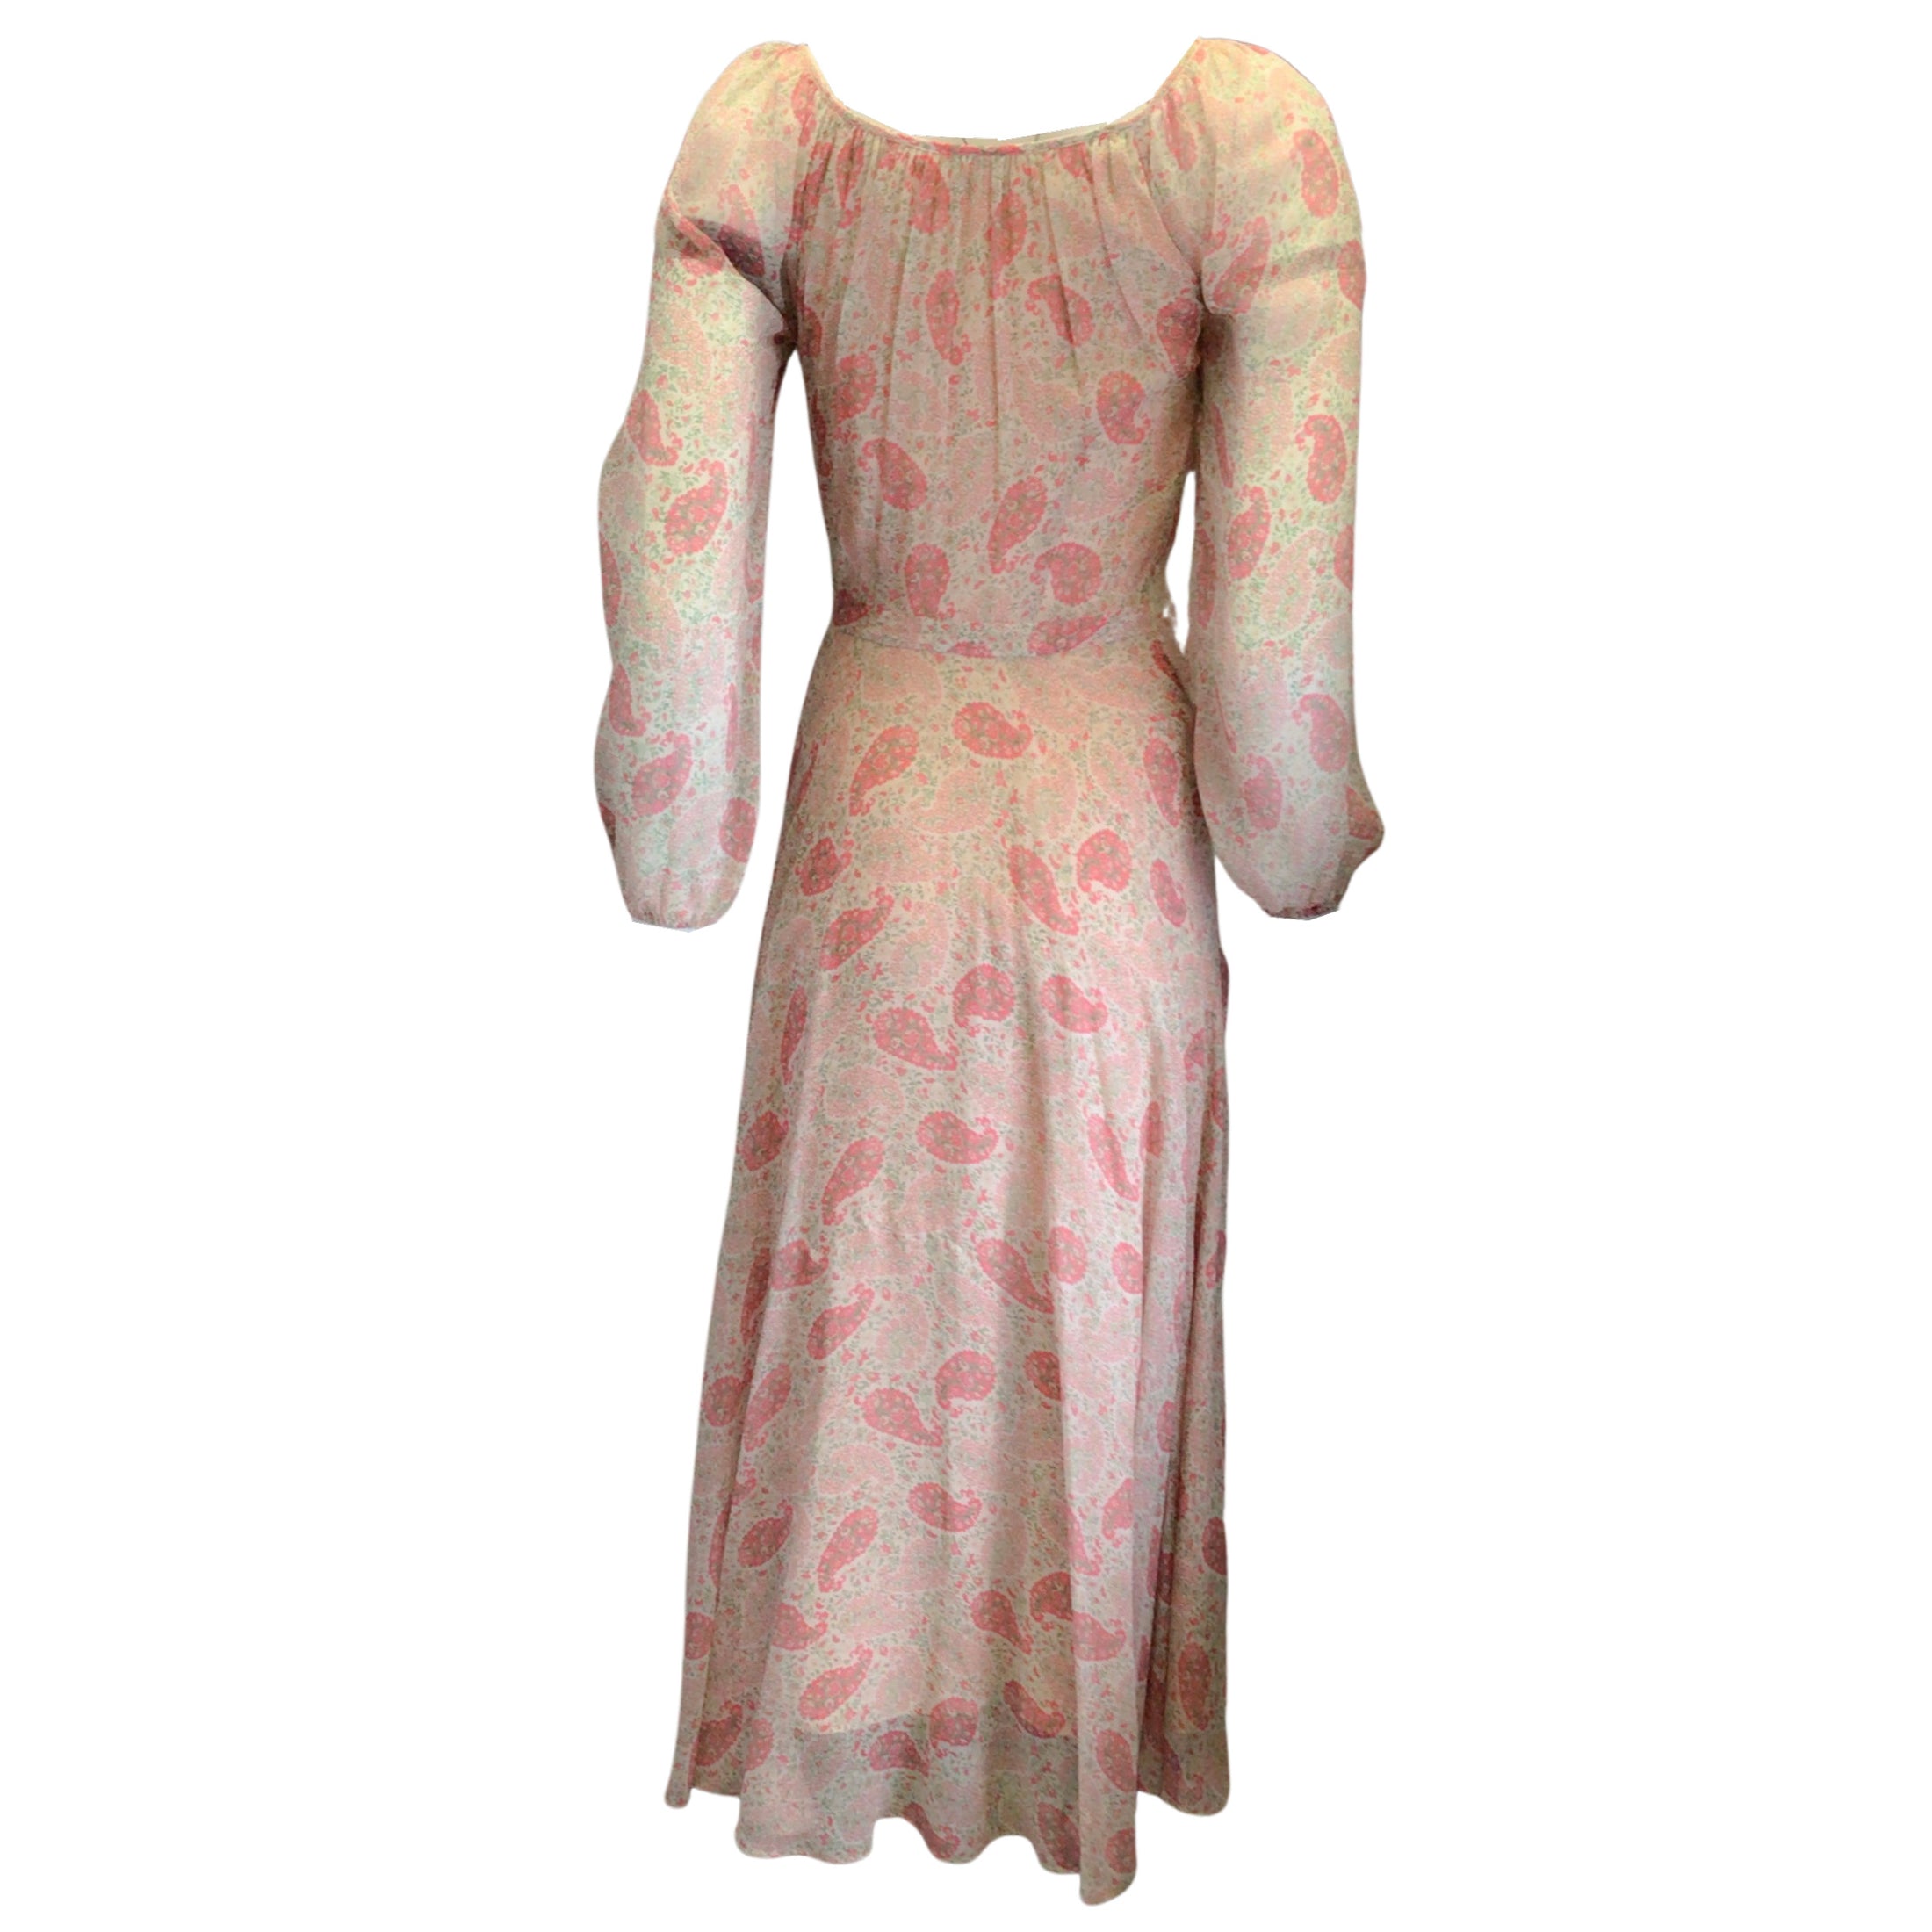 Co. Ivory / Pink / Green Multi Floral Paisley Printed Long Sleeved Silk Midi Dress